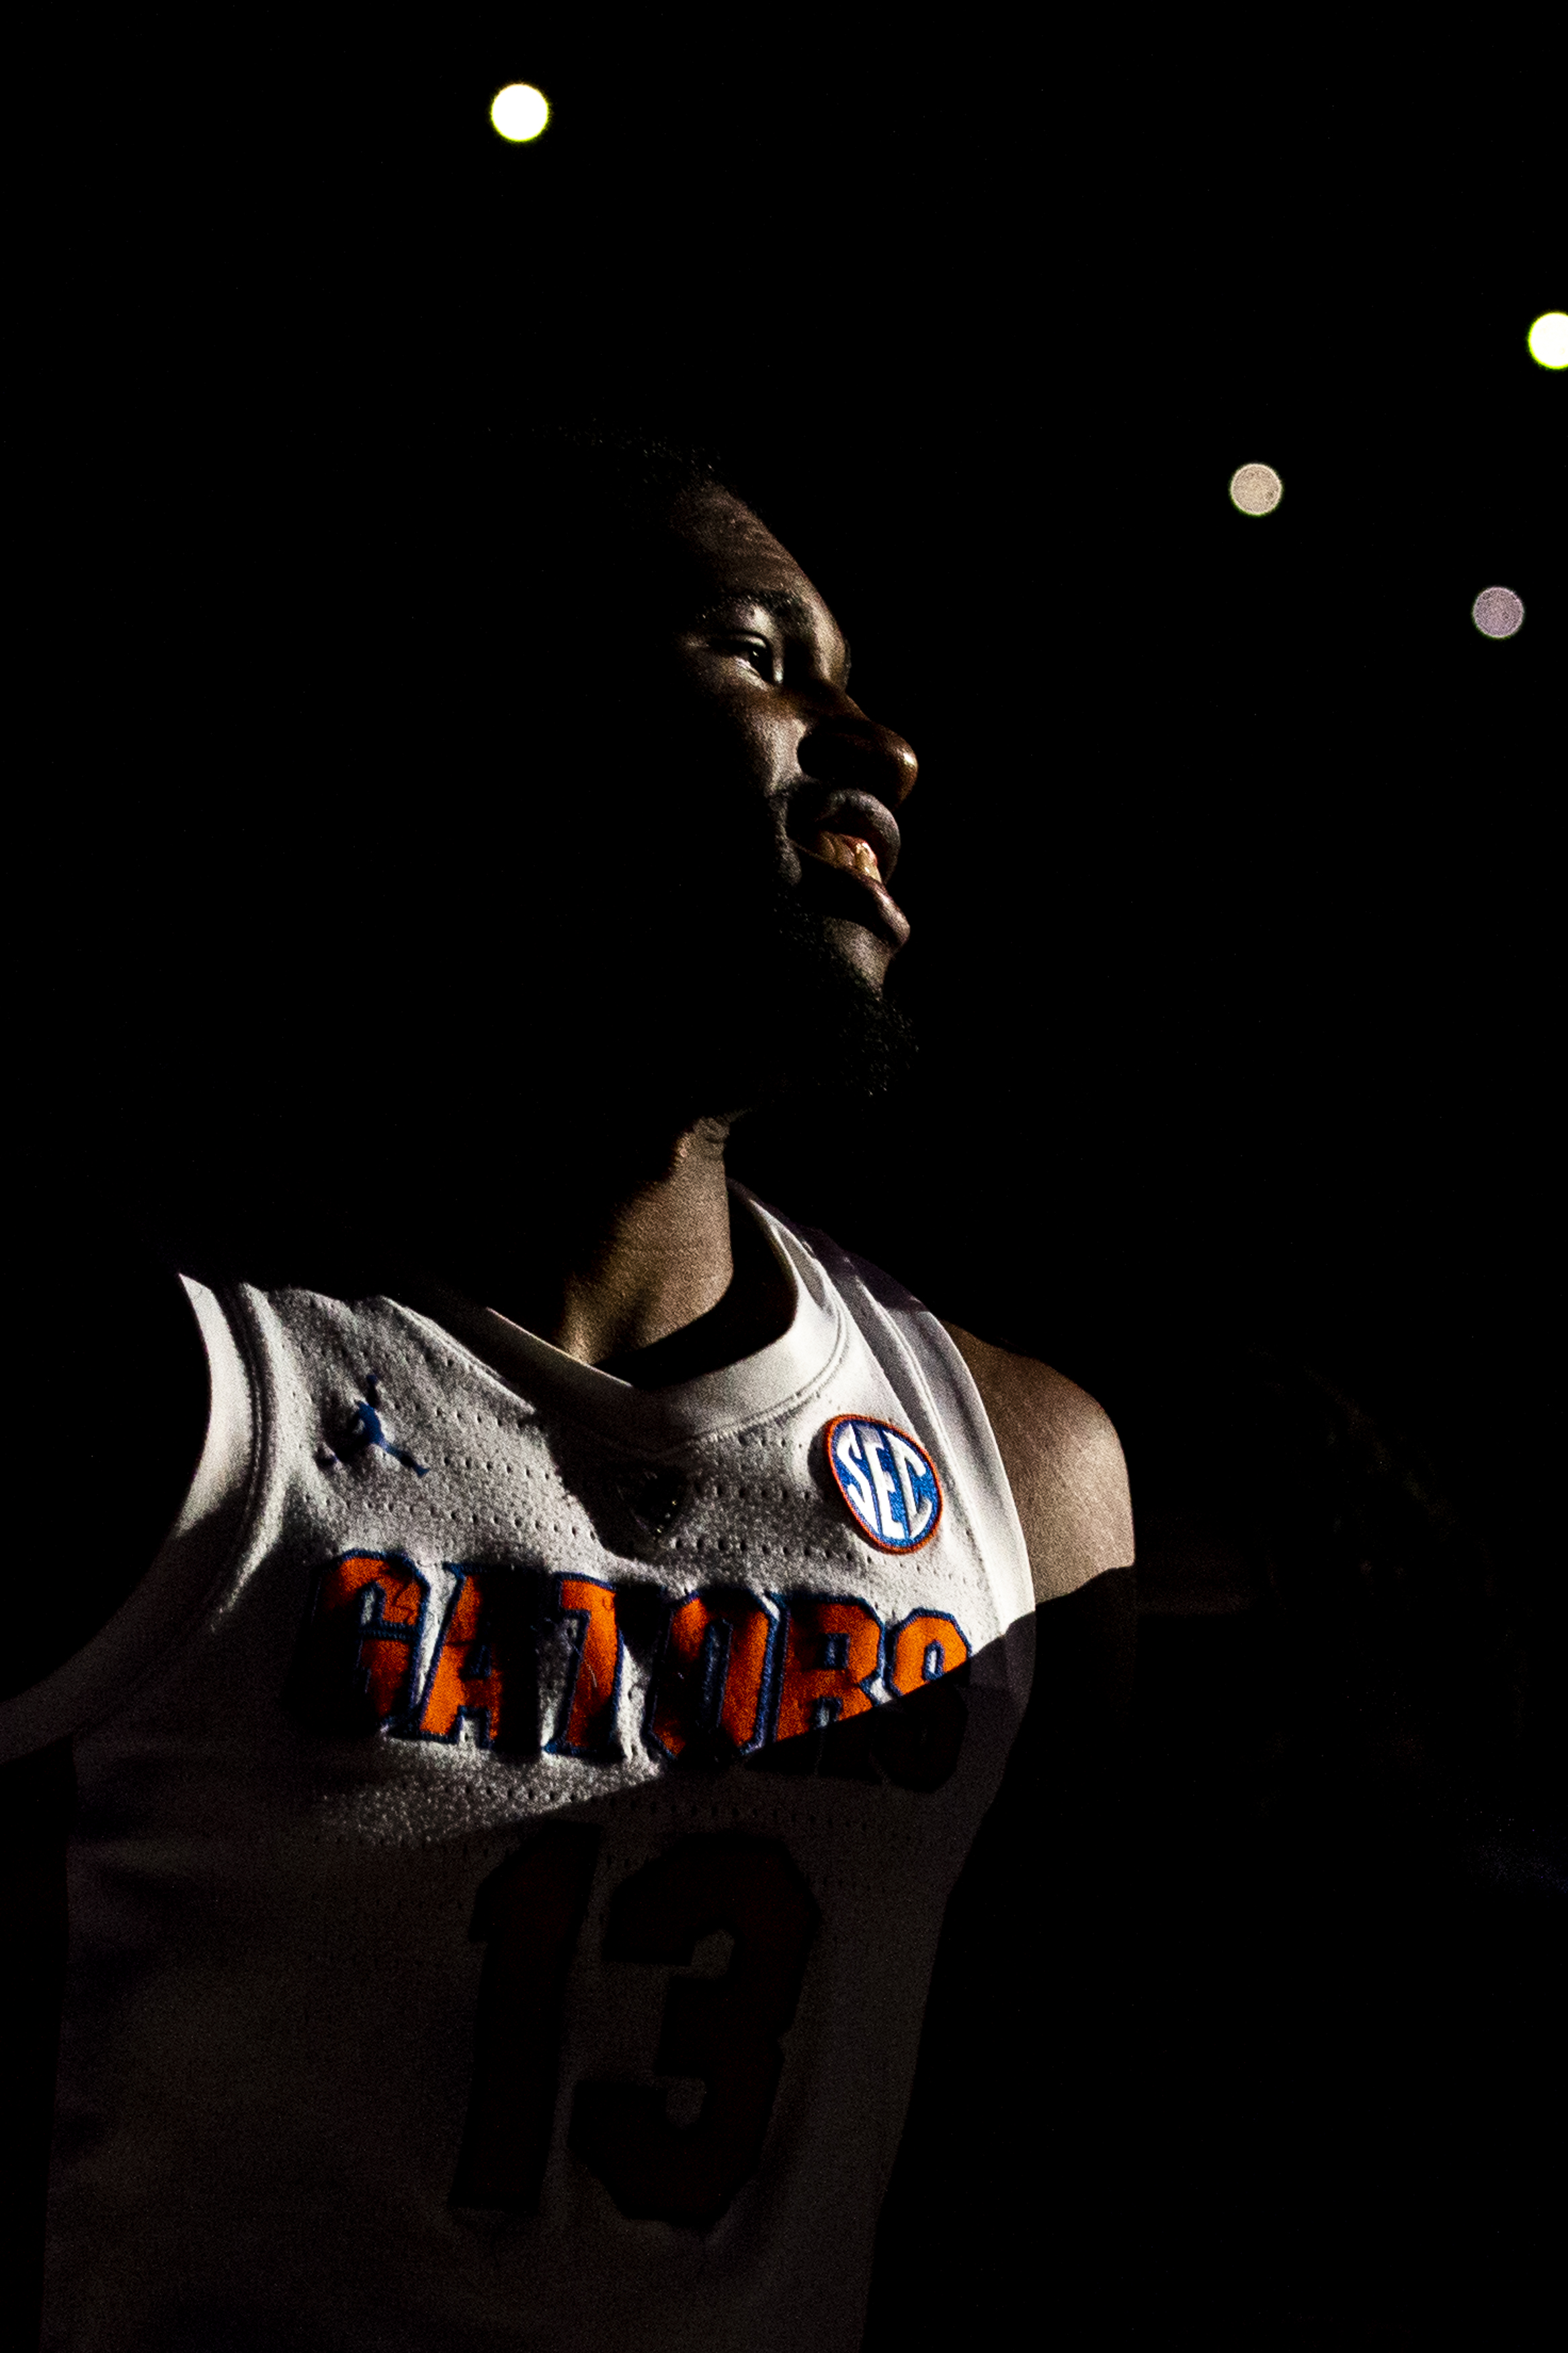  Florida Gators center Kevarrius Hayes (13) walks onto the court as the starting lineup is announced during the Florida Gators home game against the South Carolina Gamecocks on January 5, 2019. 